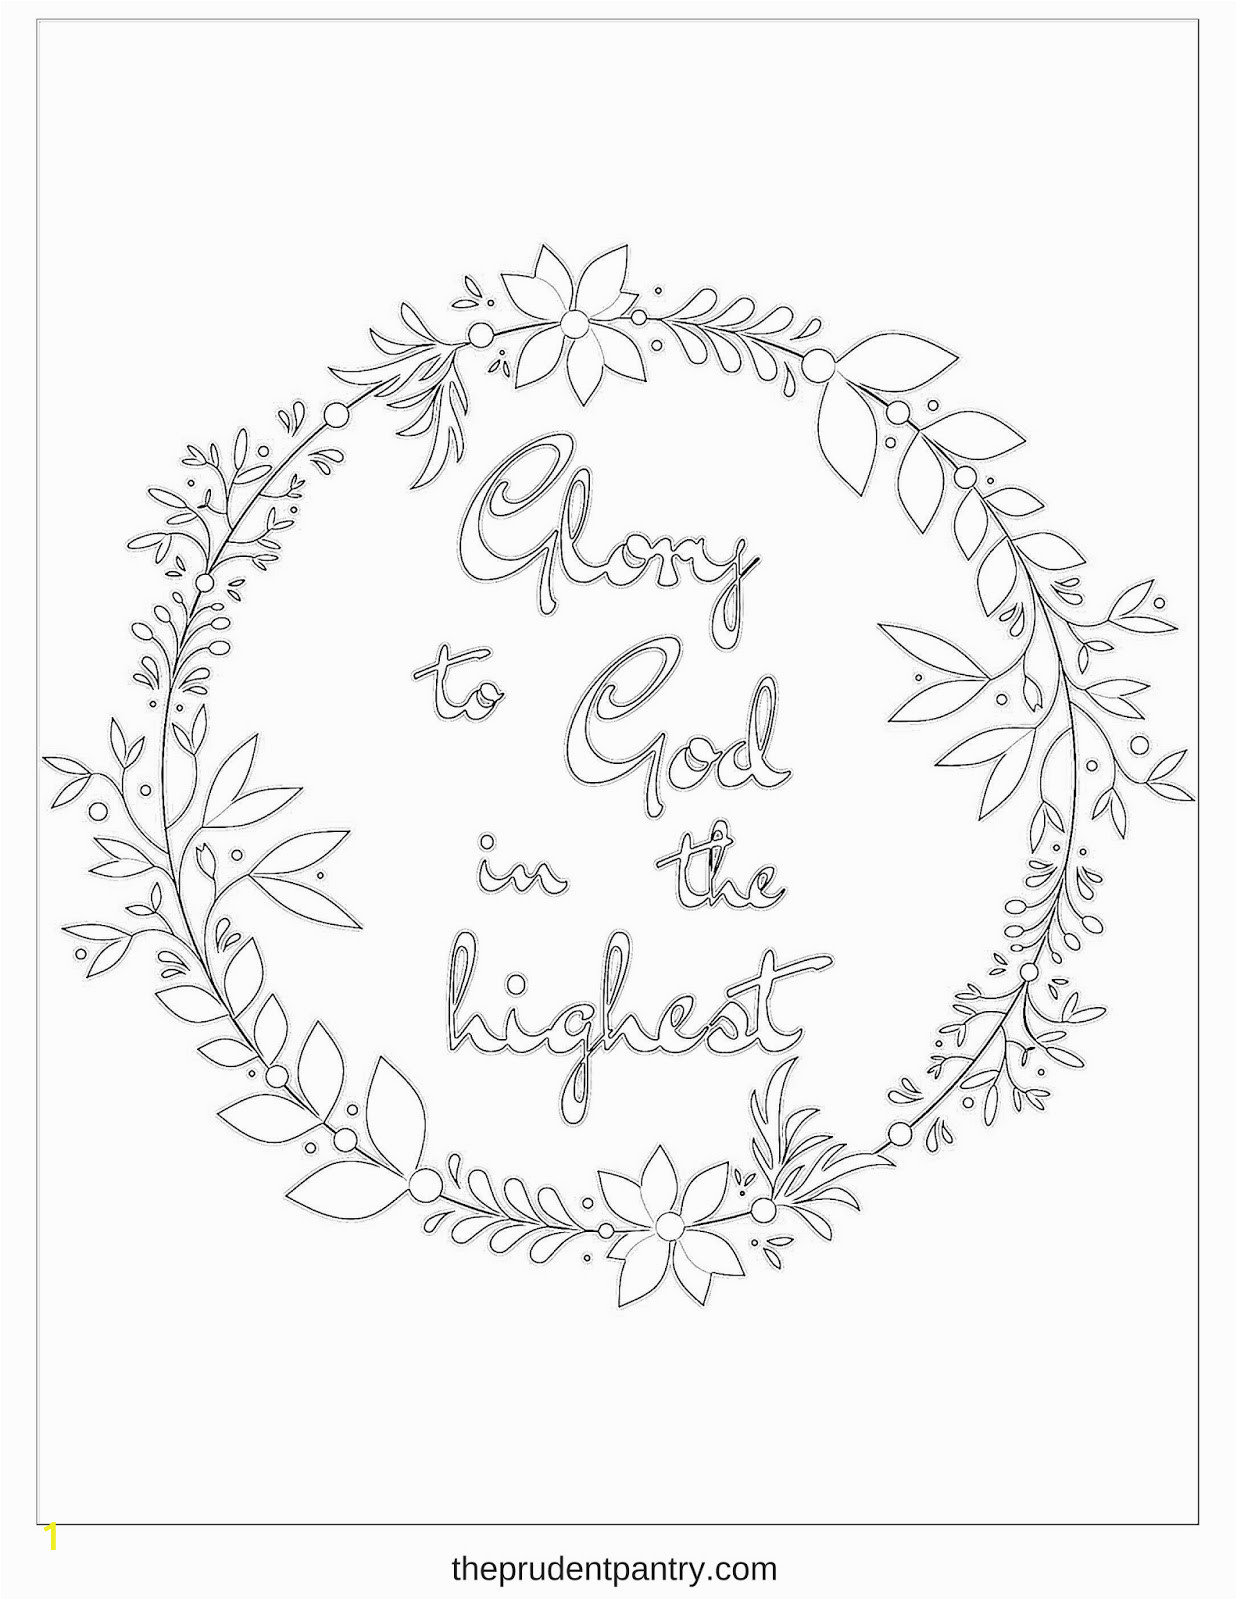 Glory to God coloring page